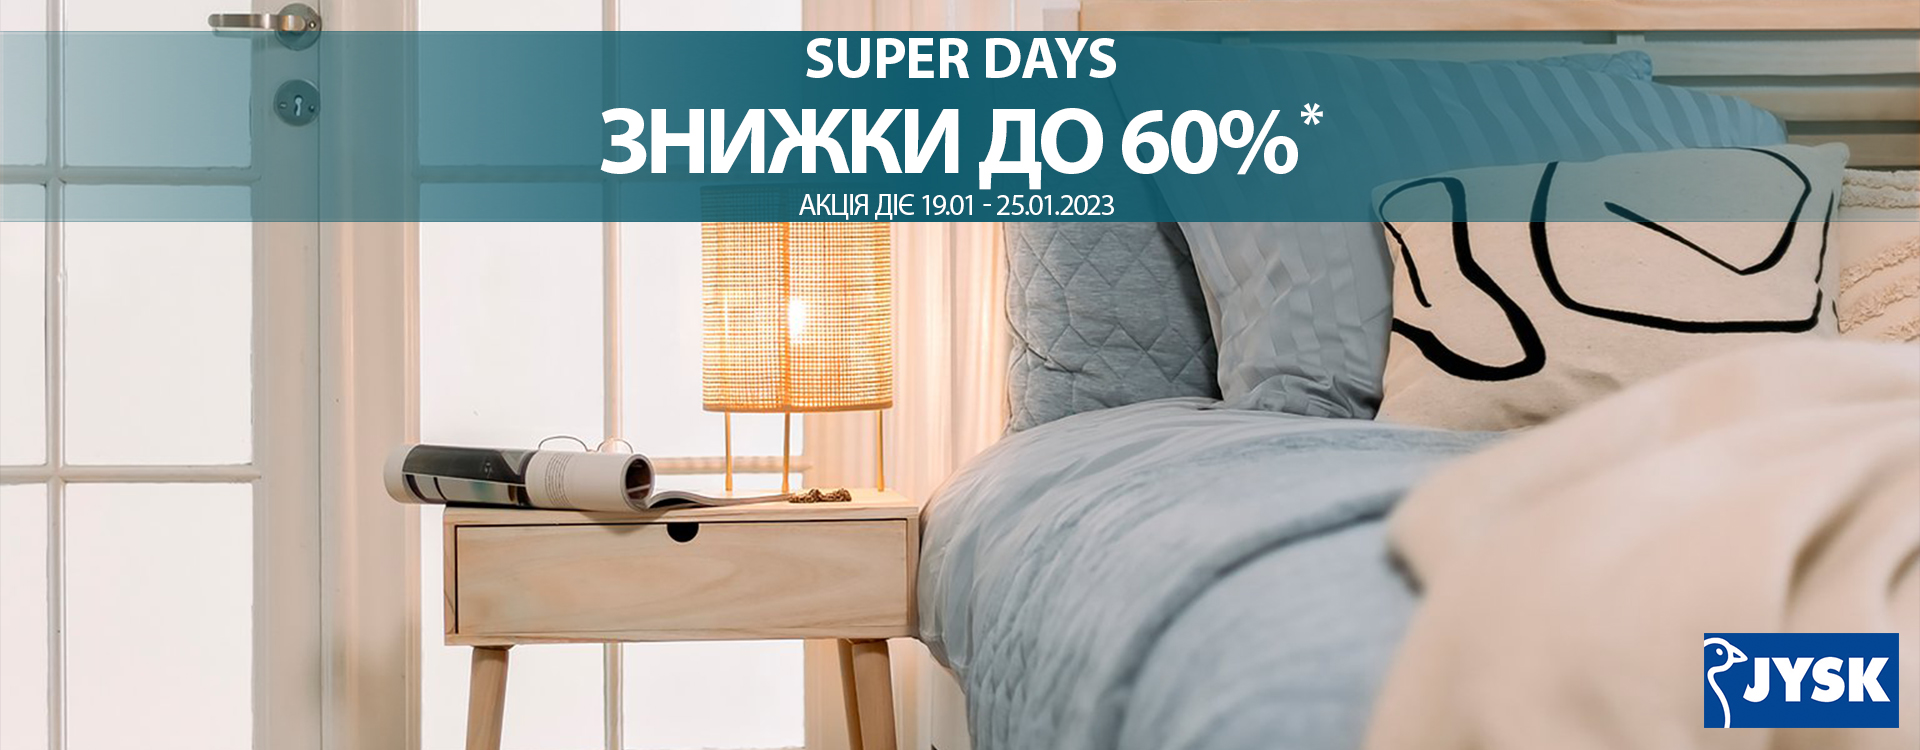 Super Days and super discounts of up to 60% 